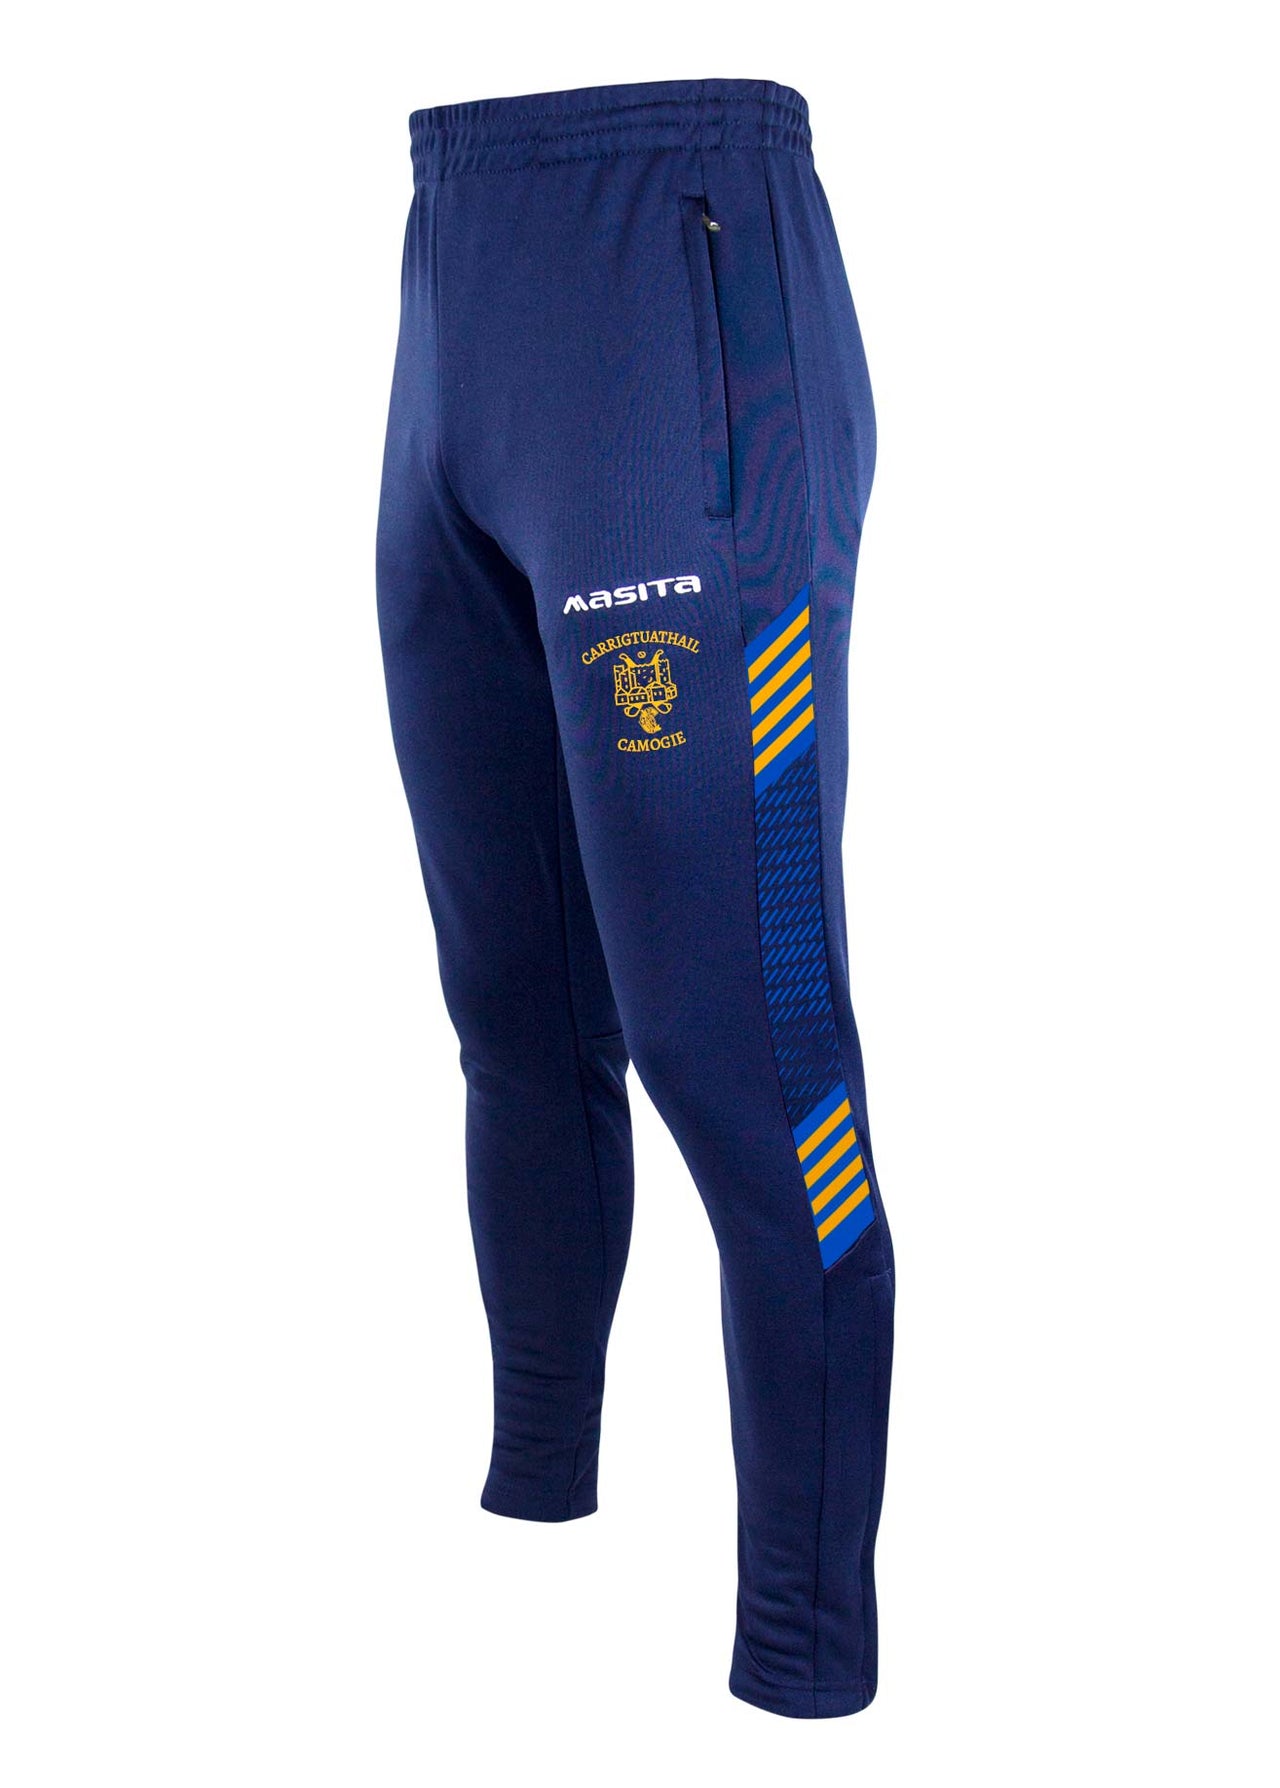 Carrigtwohill Camogie Hydro Skinny Bottoms Kids